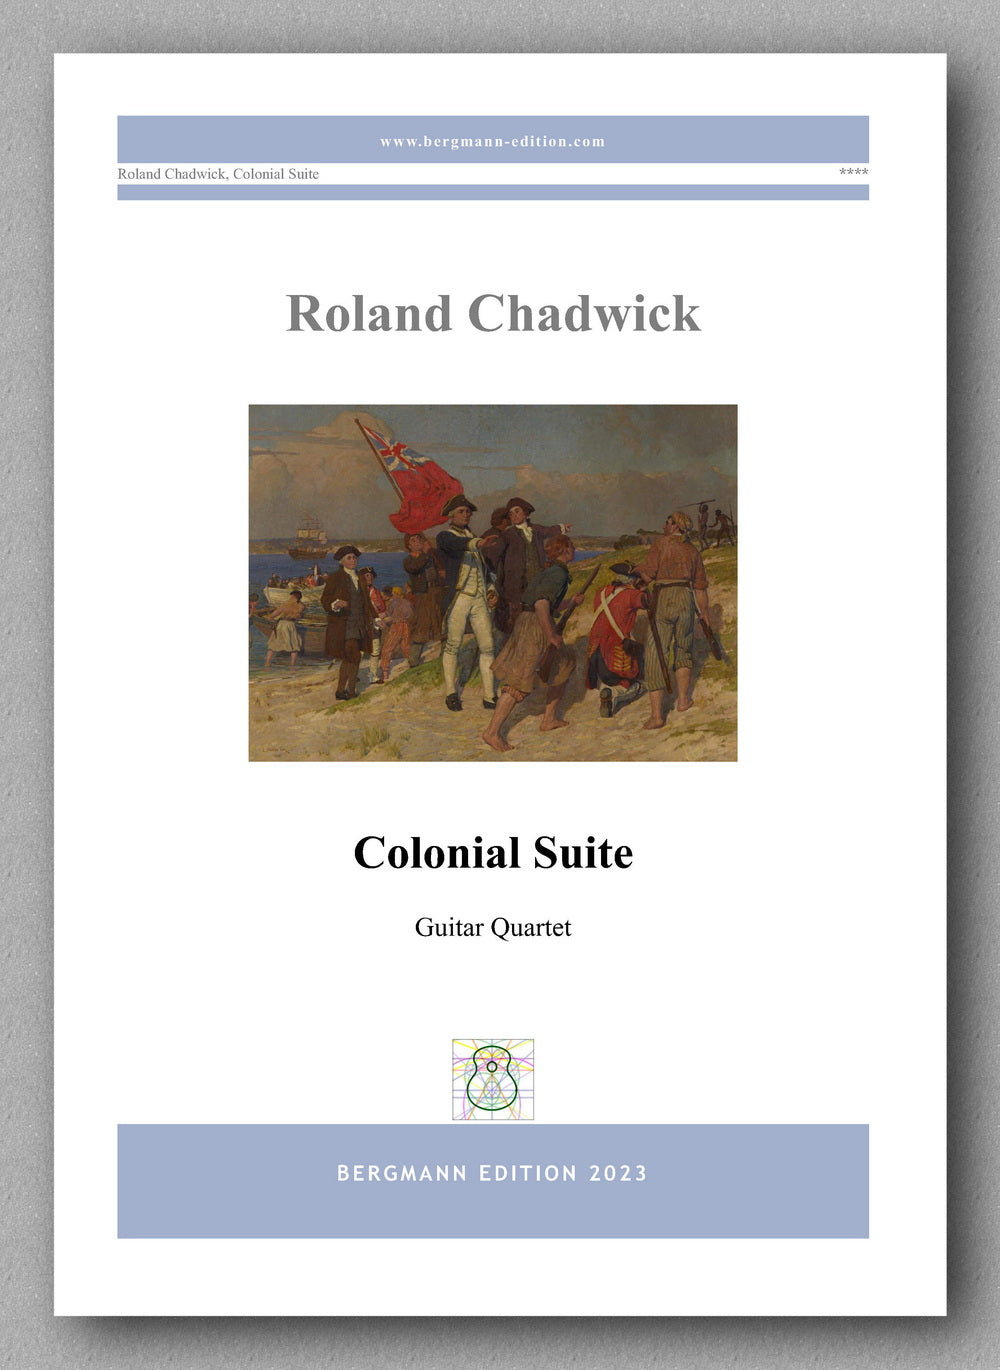 Roland Chadwick, Colonial Suite - preview of the cover